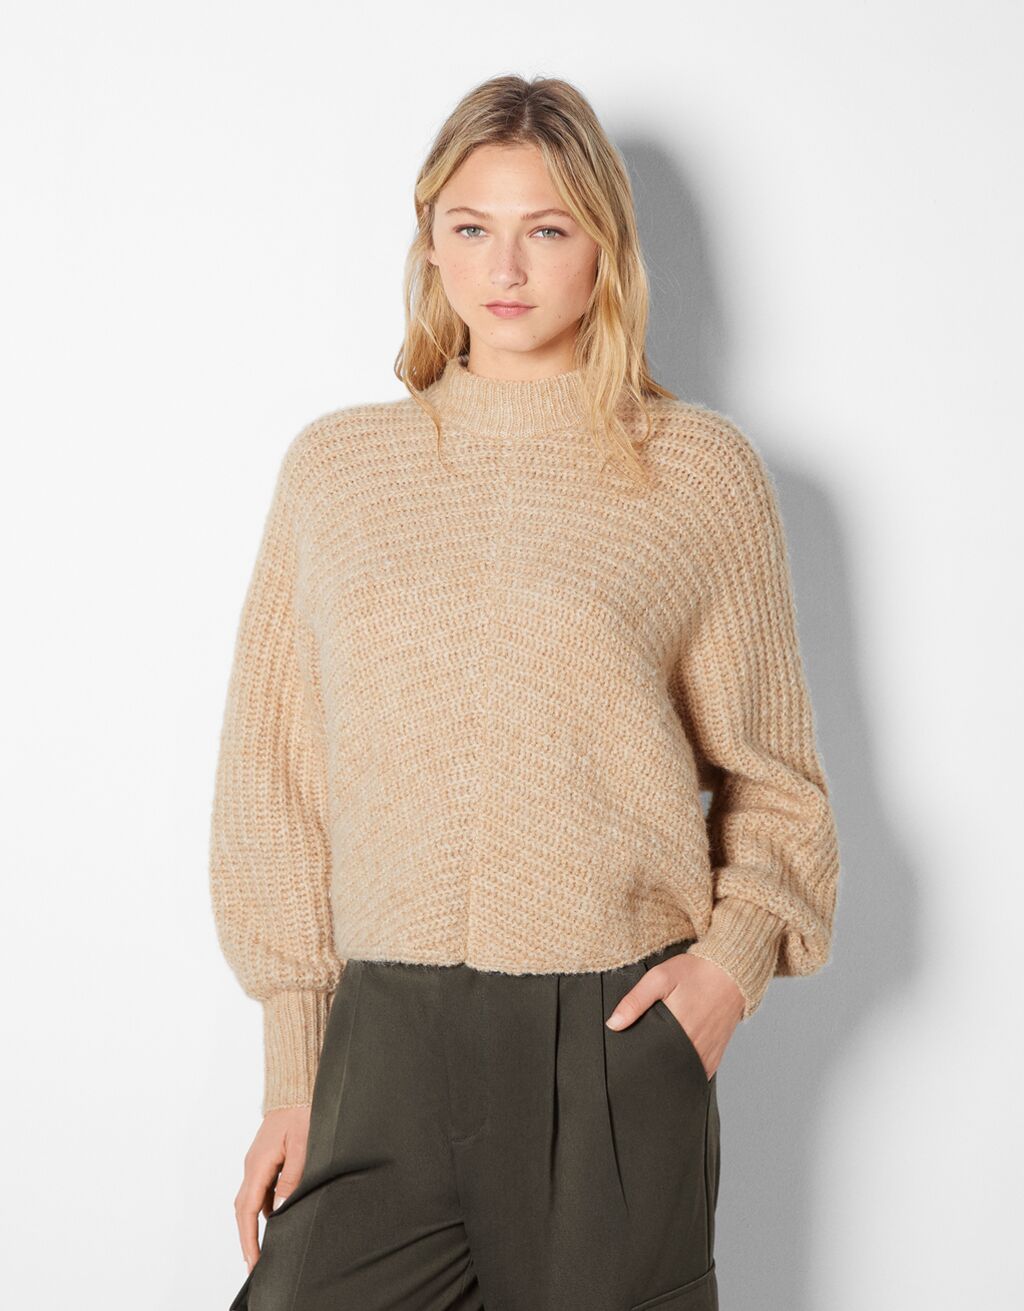 High neck sweater with wide sleeves and a ribbed seam